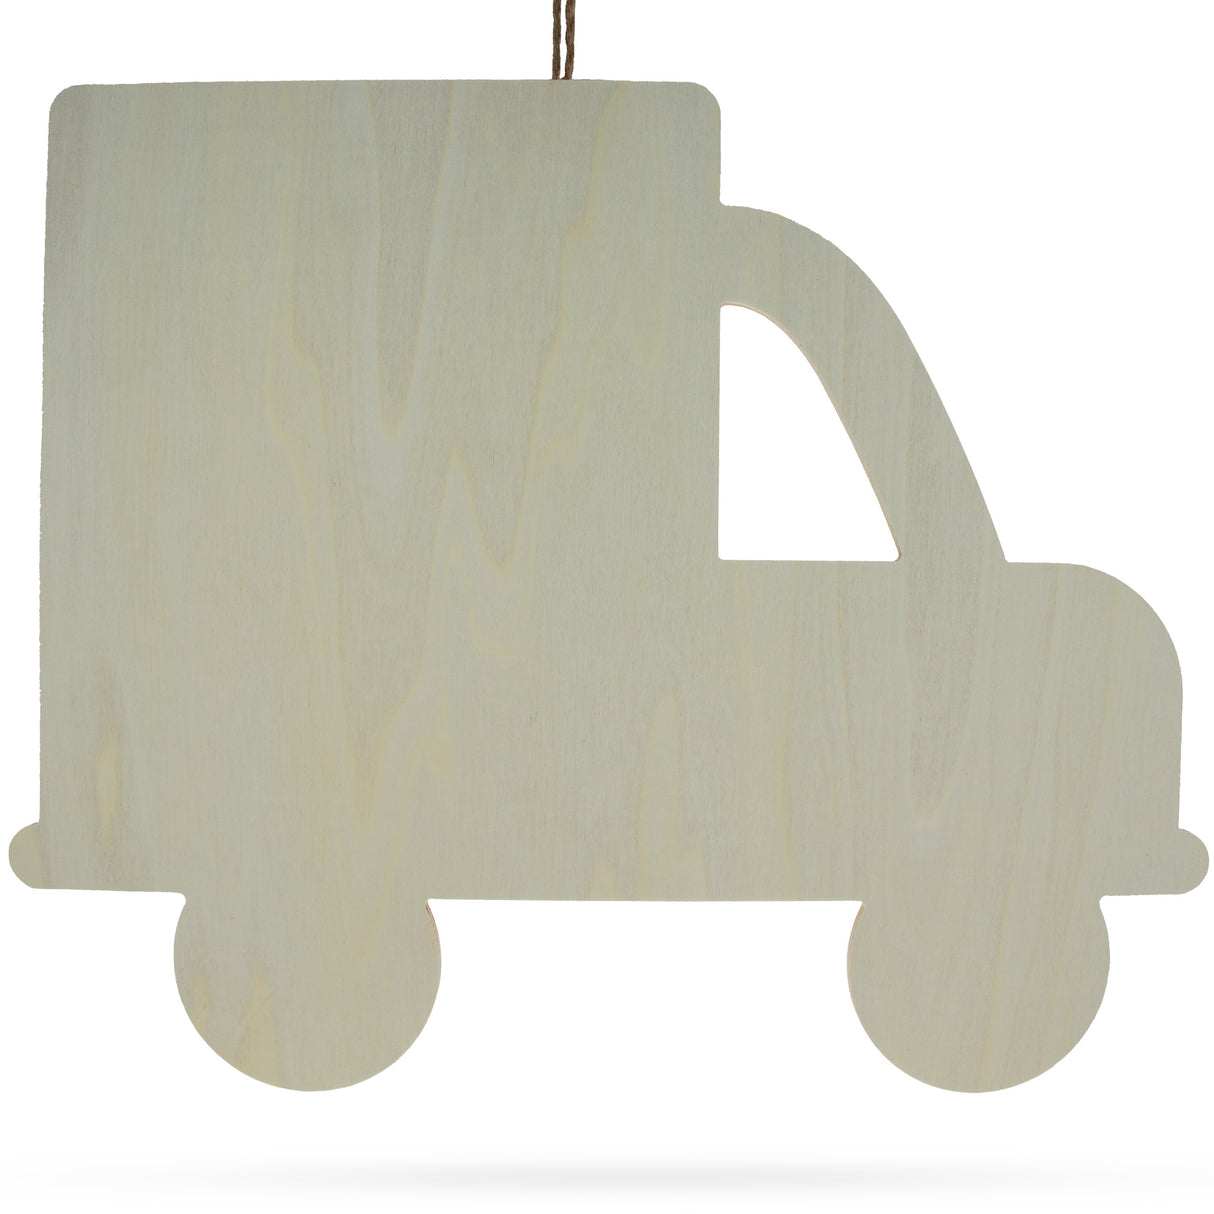 Unfinished Wooden Truck Shape Cutout DIY Craft 12.5 Inches in Beige color,  shape